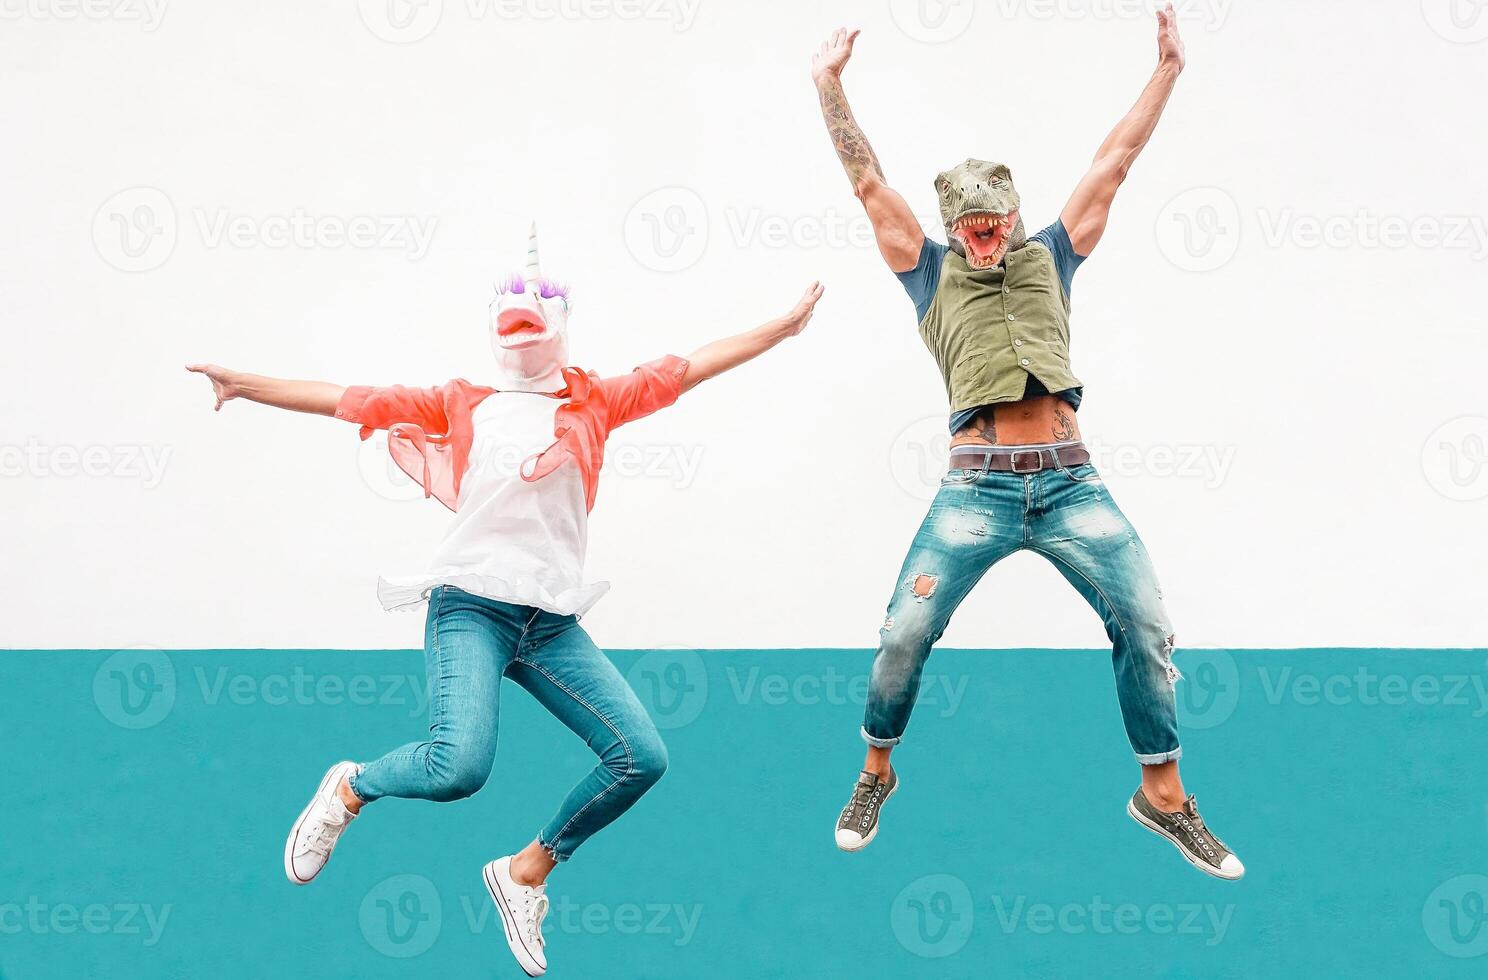 Happy seniors crazy couple wearing unicorn and t-rex mask while jumping outdoor - Mature trendy people having fun celebrating outside - Absurd concept of masquerade funny holidays photo